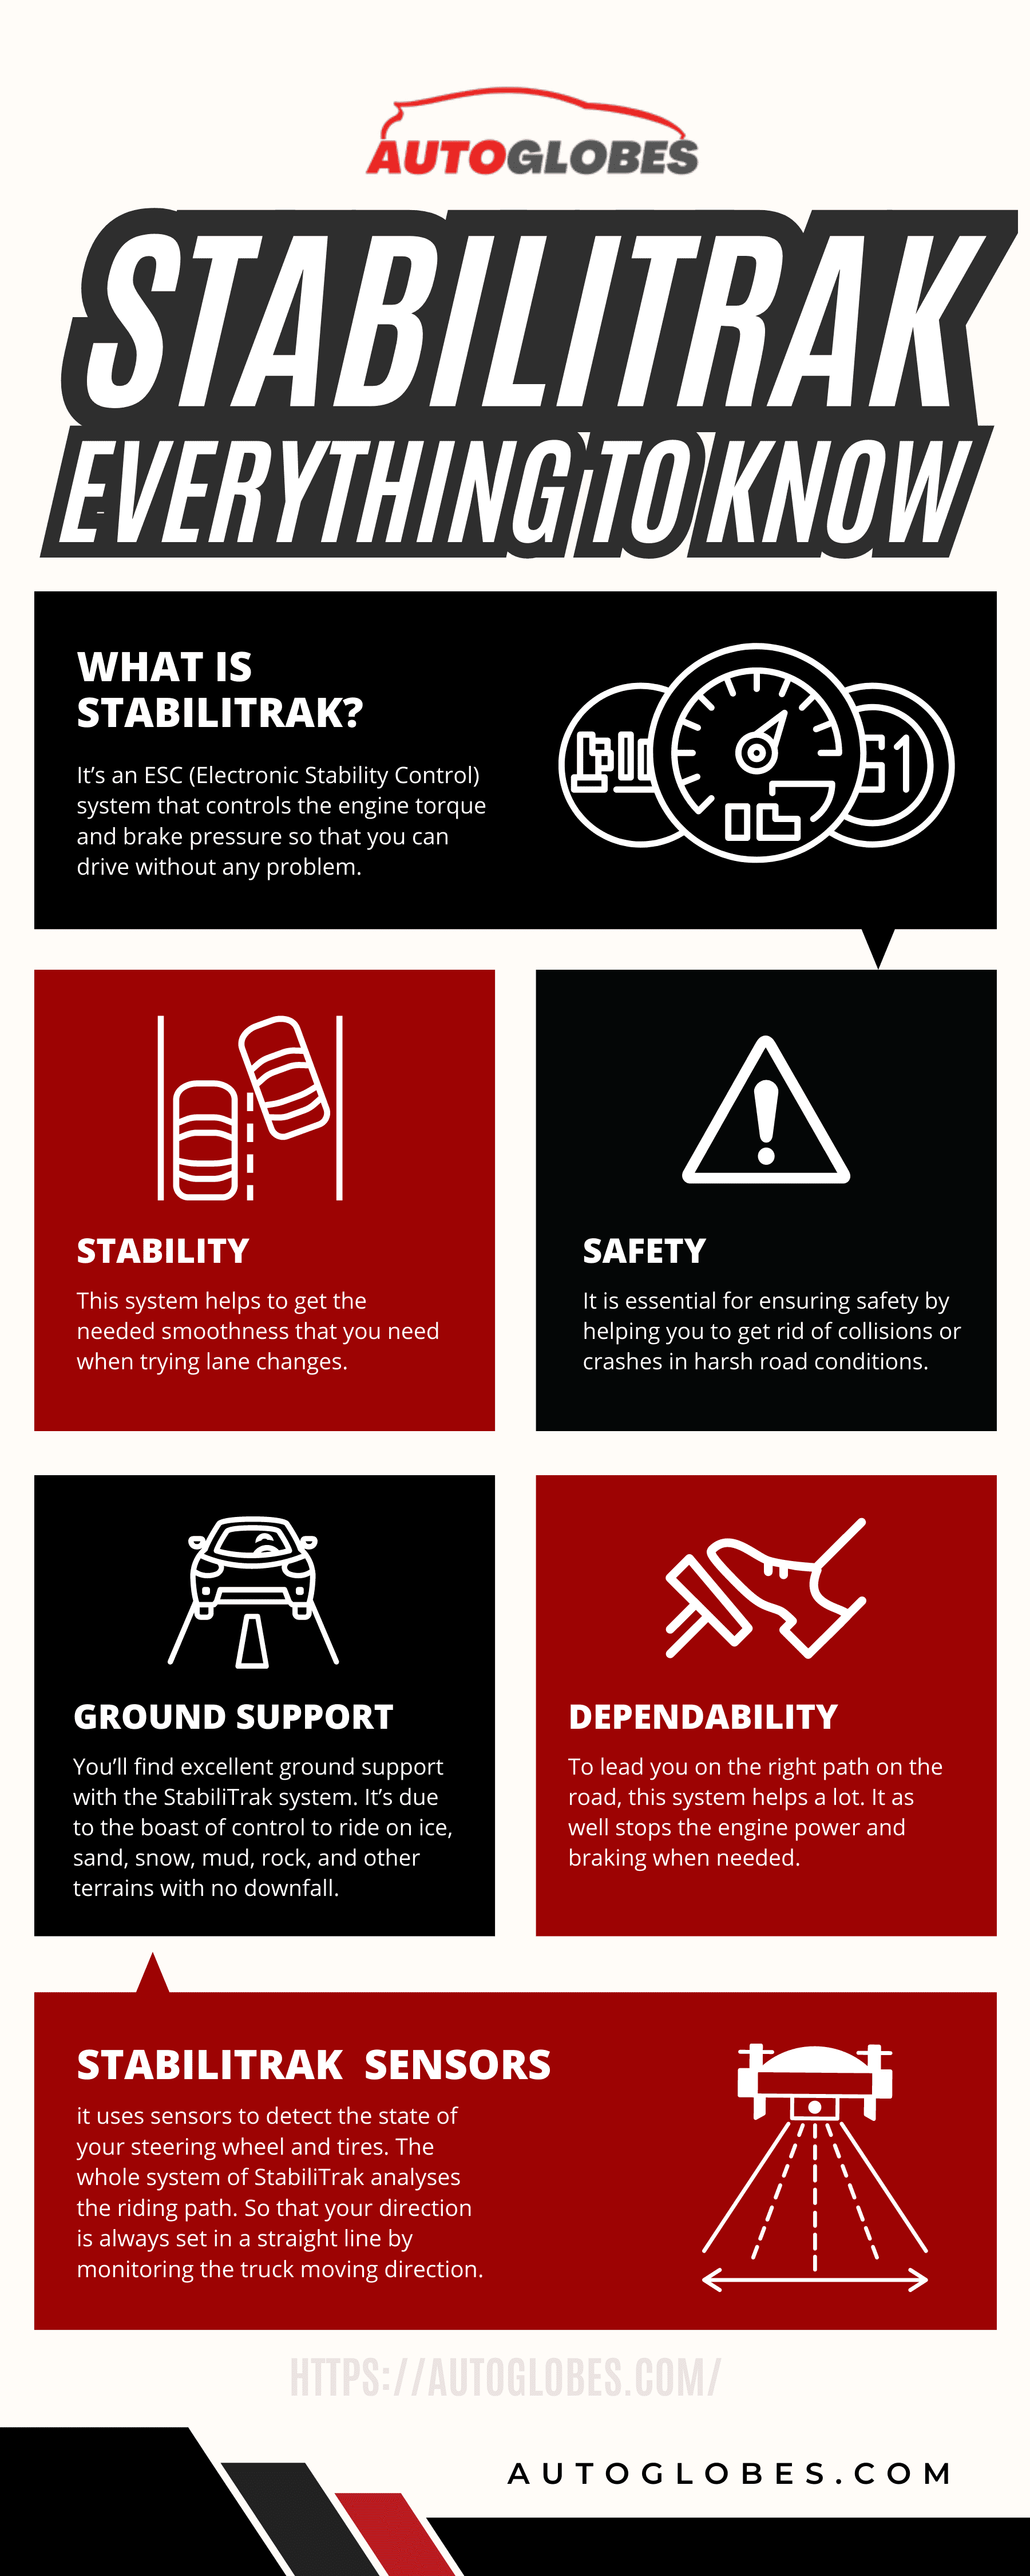 StabiliTrak Everything to Know Infographic